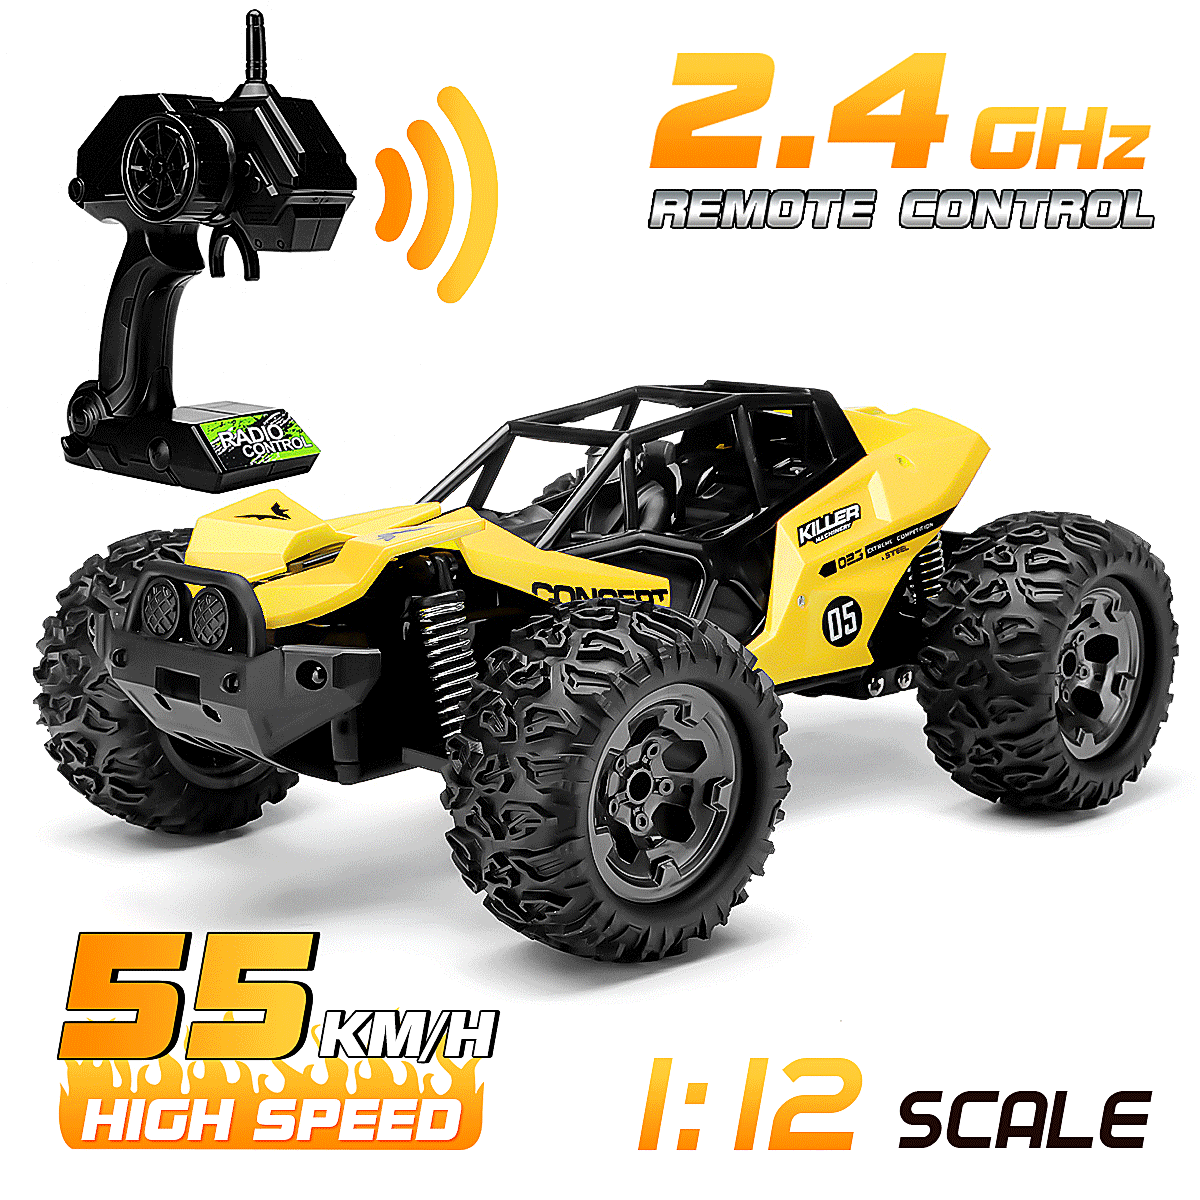 km/h High Speed Off Road Vehicle Details about   NEW 1:12 RC Car Scale Remote Control Car 48 